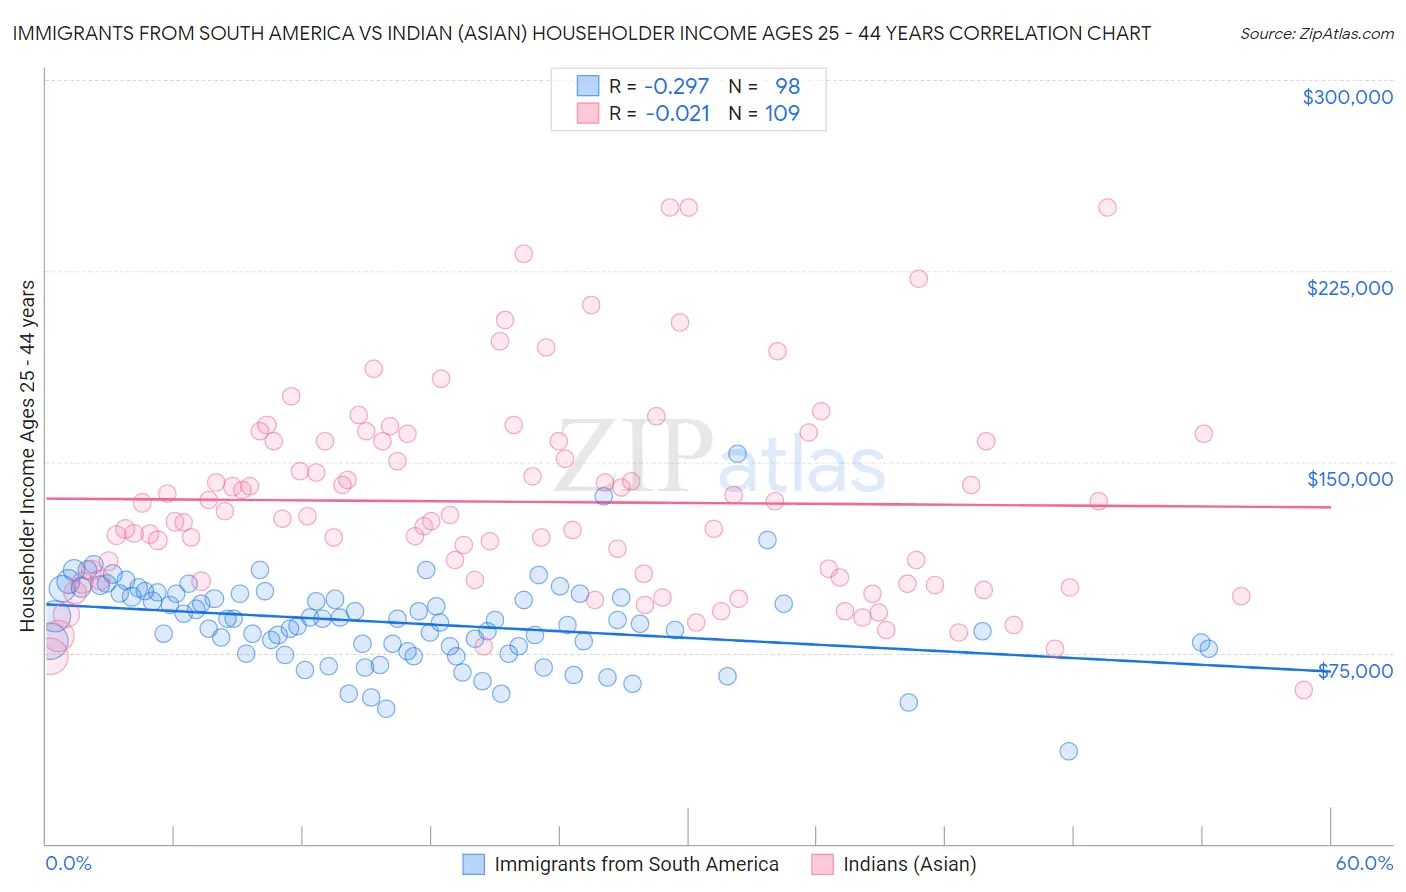 Immigrants from South America vs Indian (Asian) Householder Income Ages 25 - 44 years